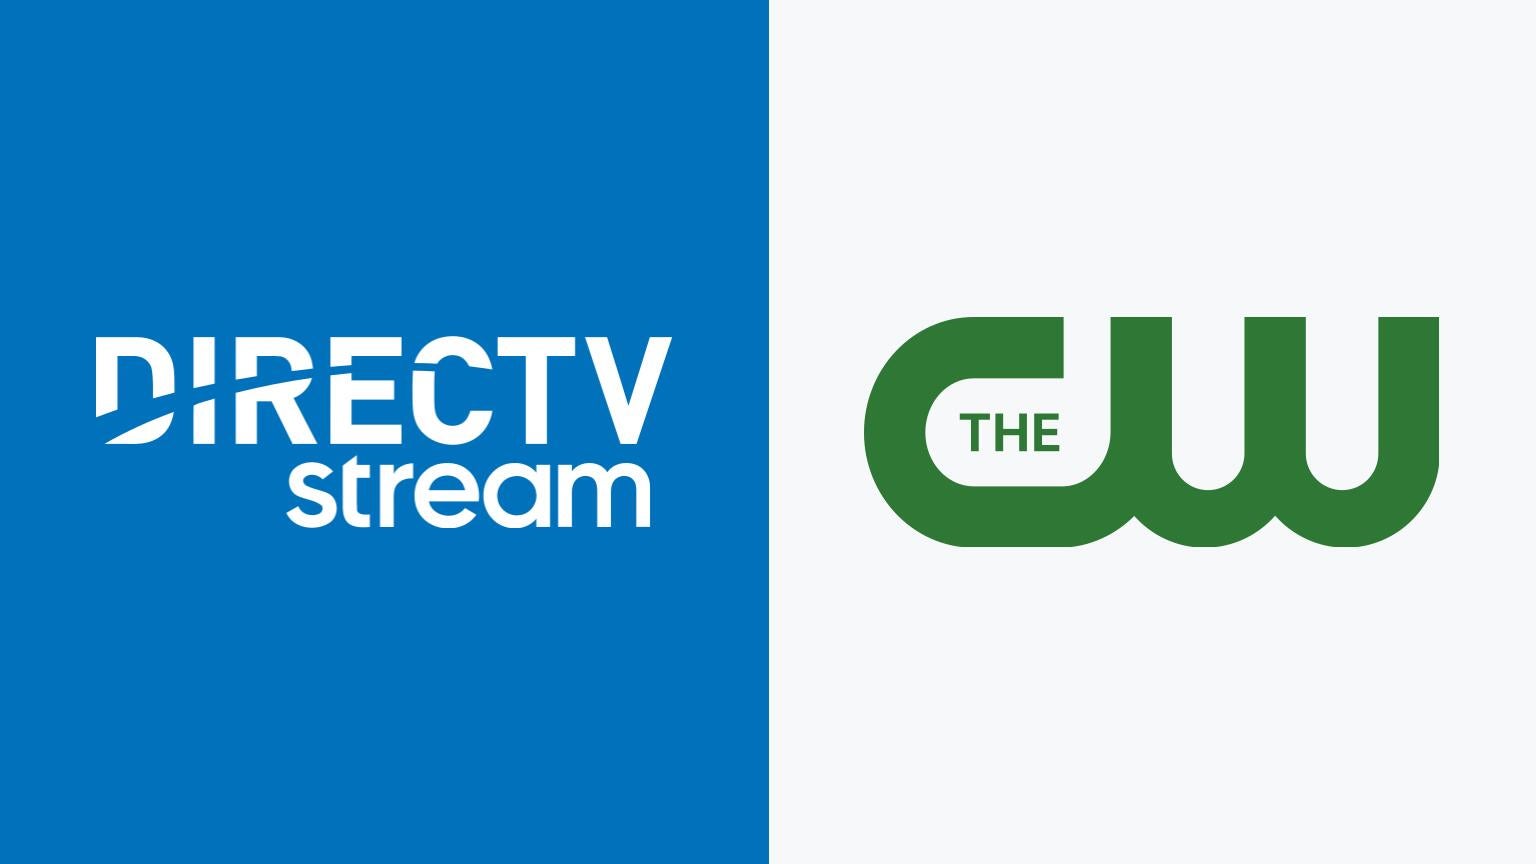 Logos for DIRECTV STREAM and The CW